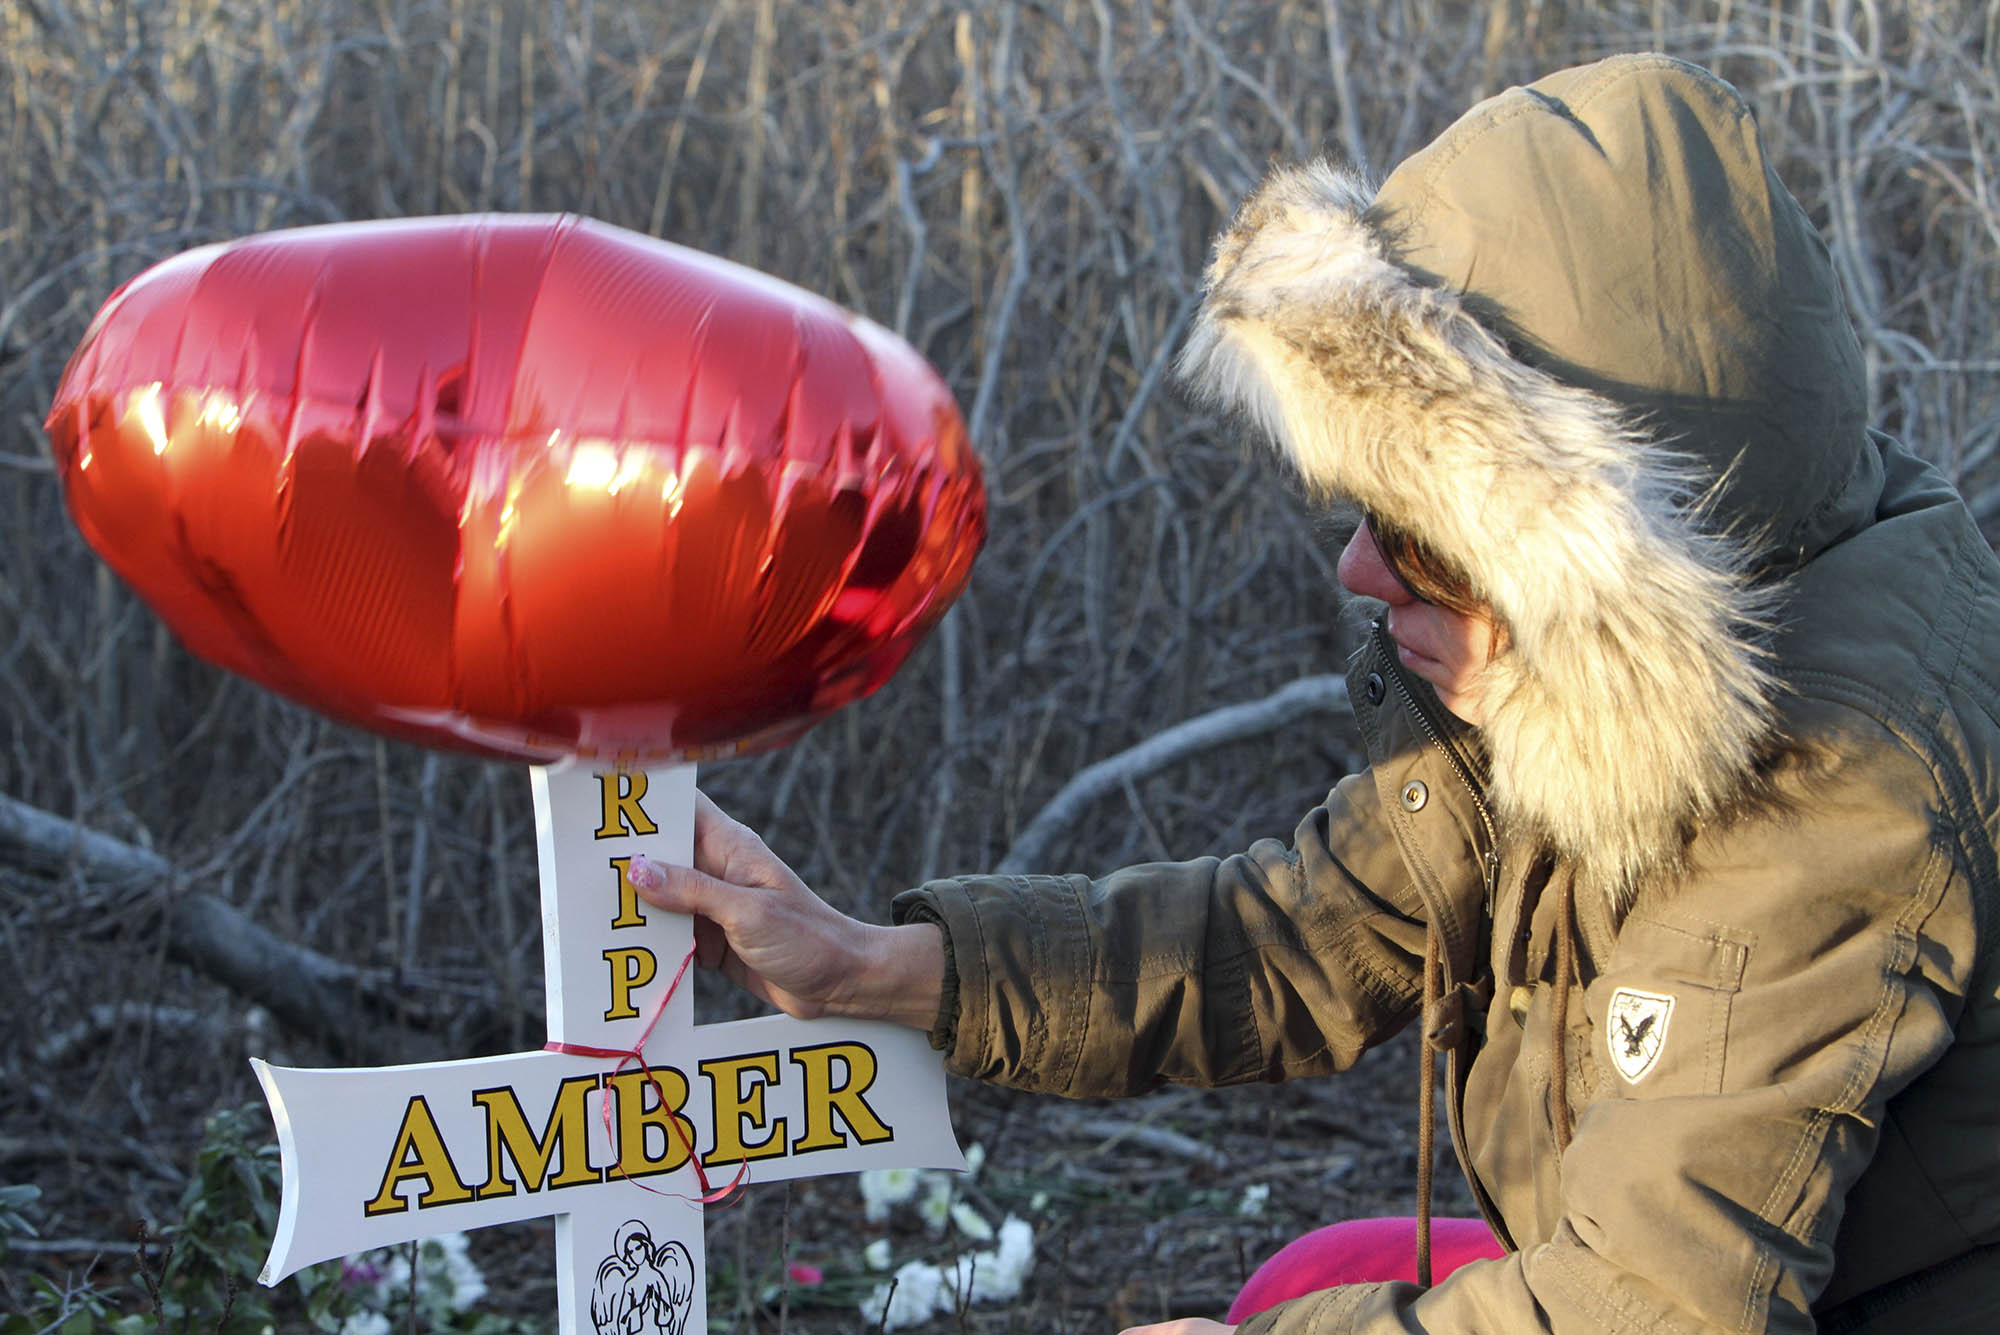 Photo: An image of Kim Overstreet, sister of Amber Lynn Costello, fixing a cross stuck into the ground as a memorial for her sister. There is a foil heart balloon on top.